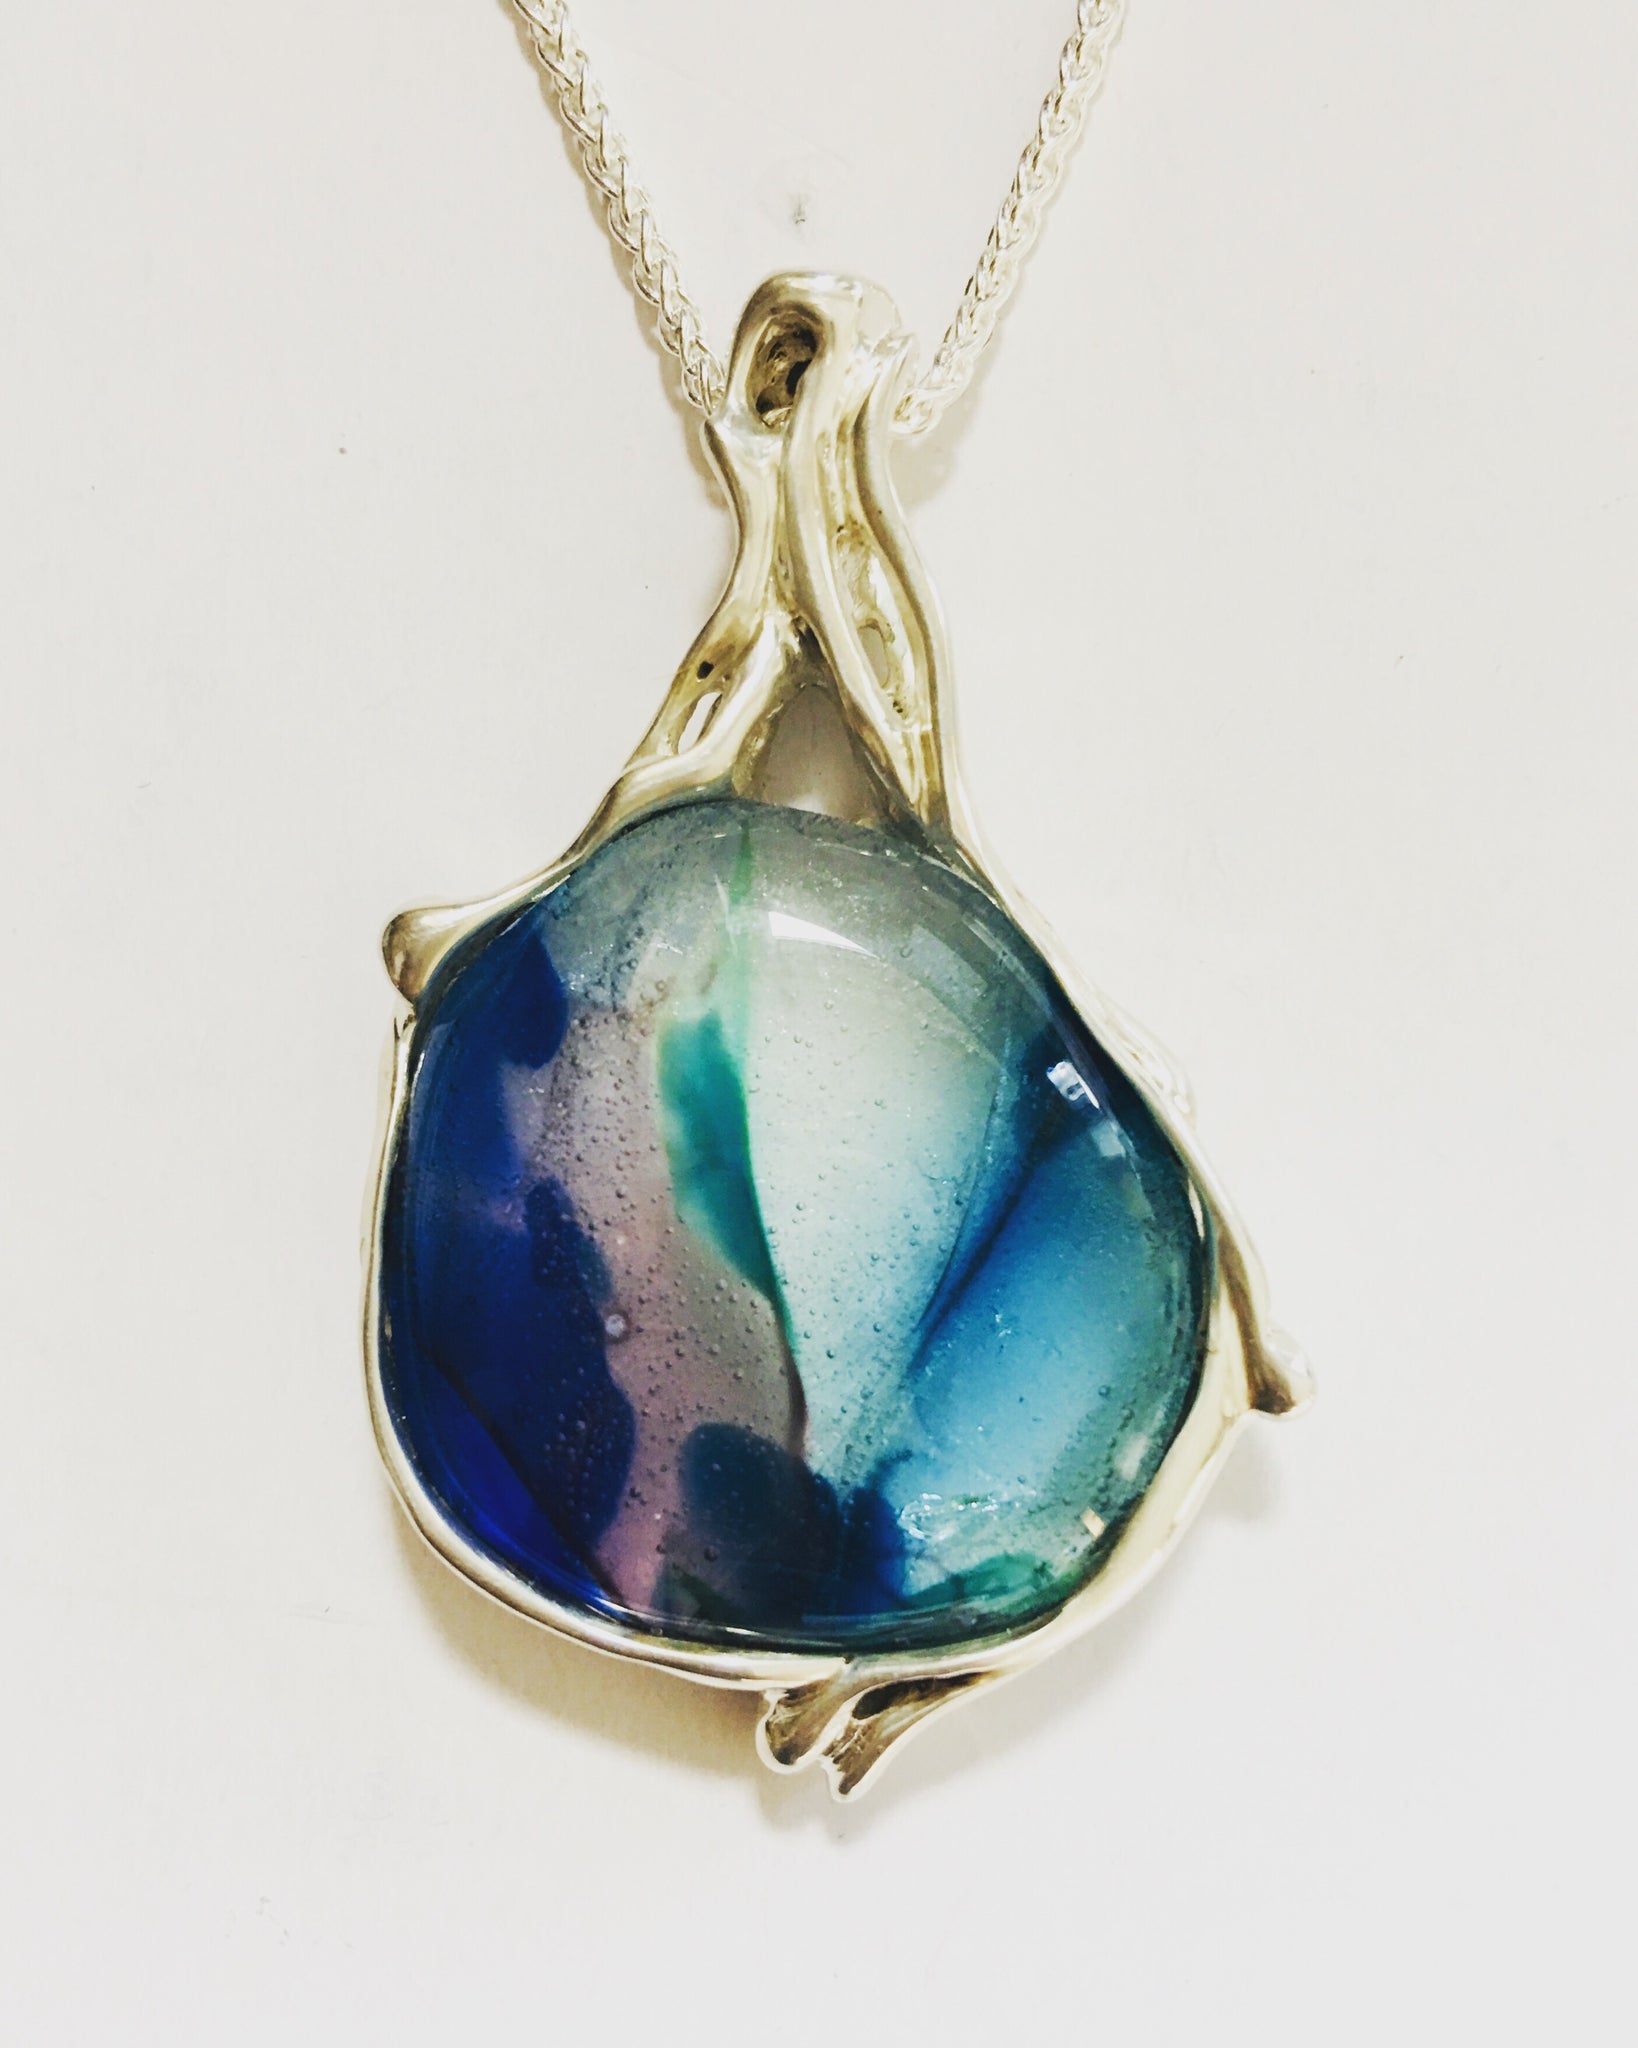 Pendant (collaboration with a fine jeweller)